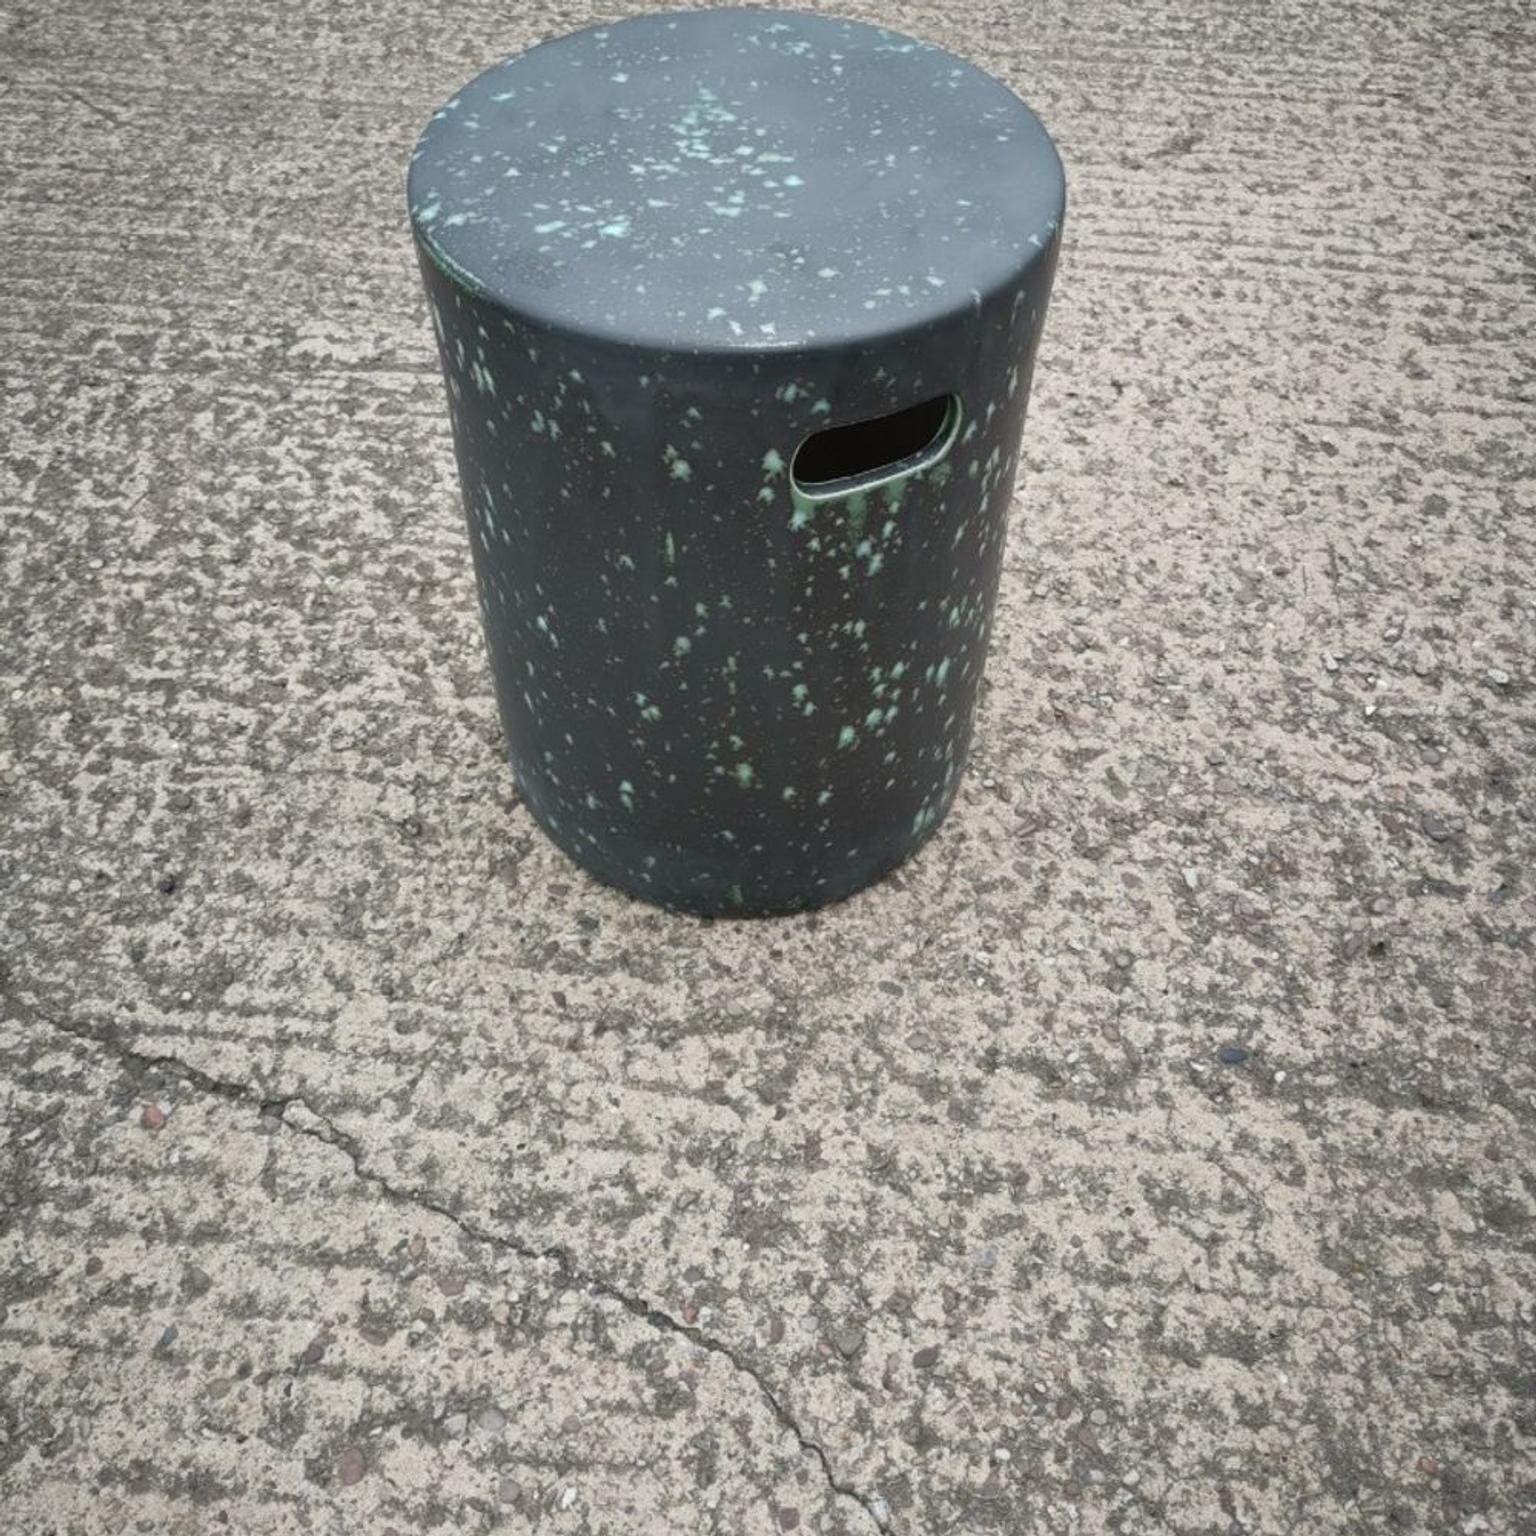 Garden Stool In Tf10 Newport For 35 00 For Sale Shpock